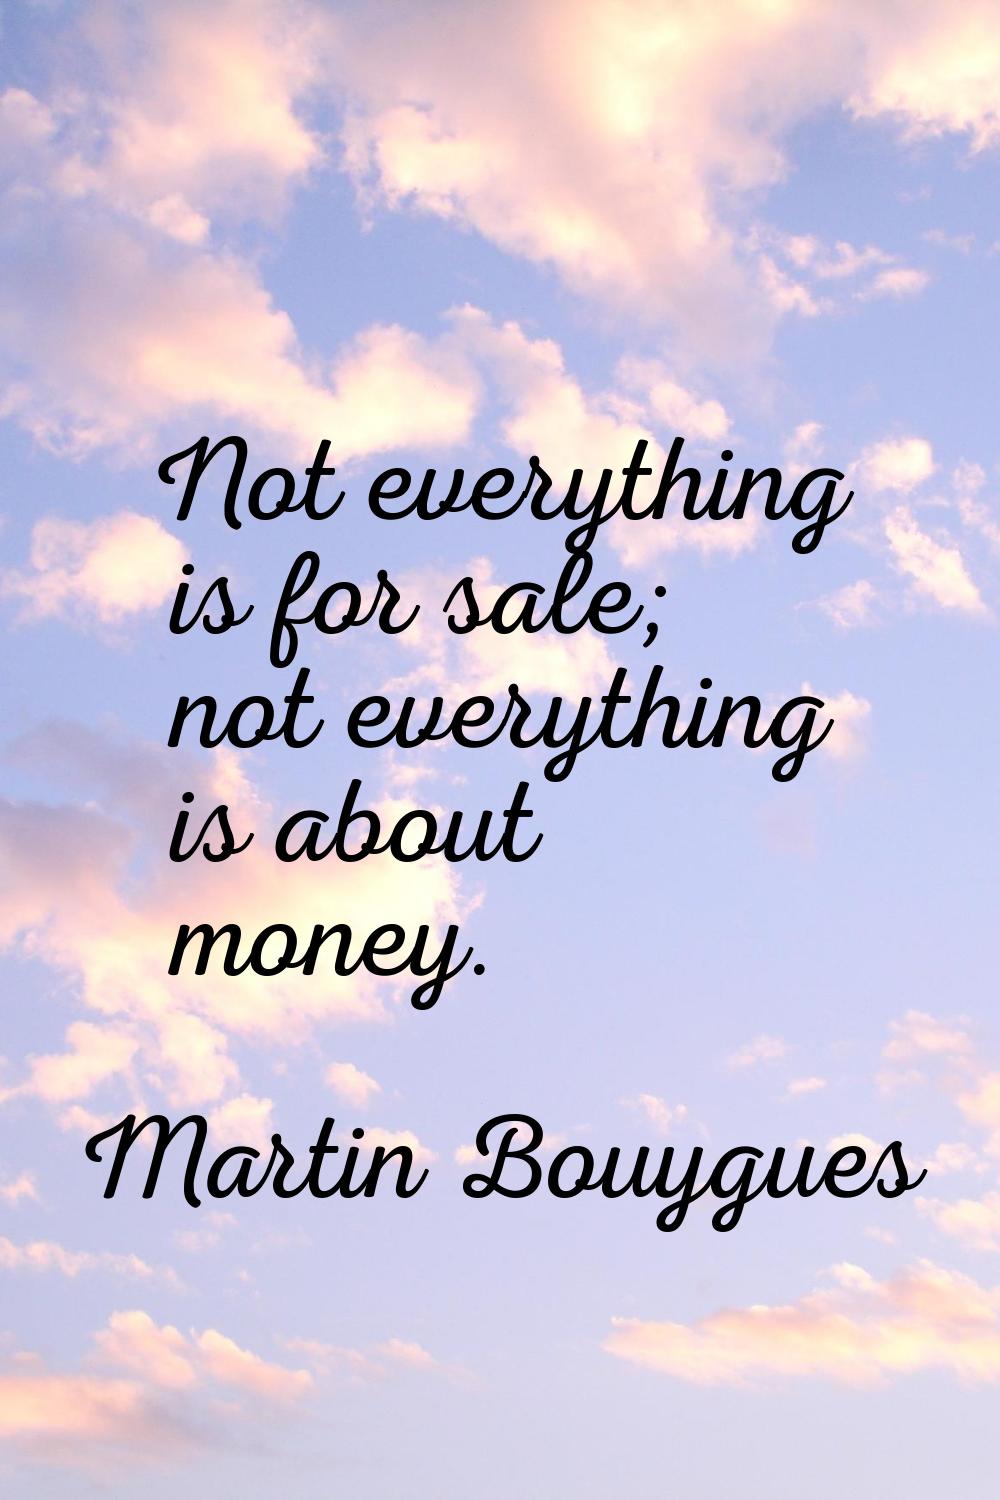 Not everything is for sale; not everything is about money.